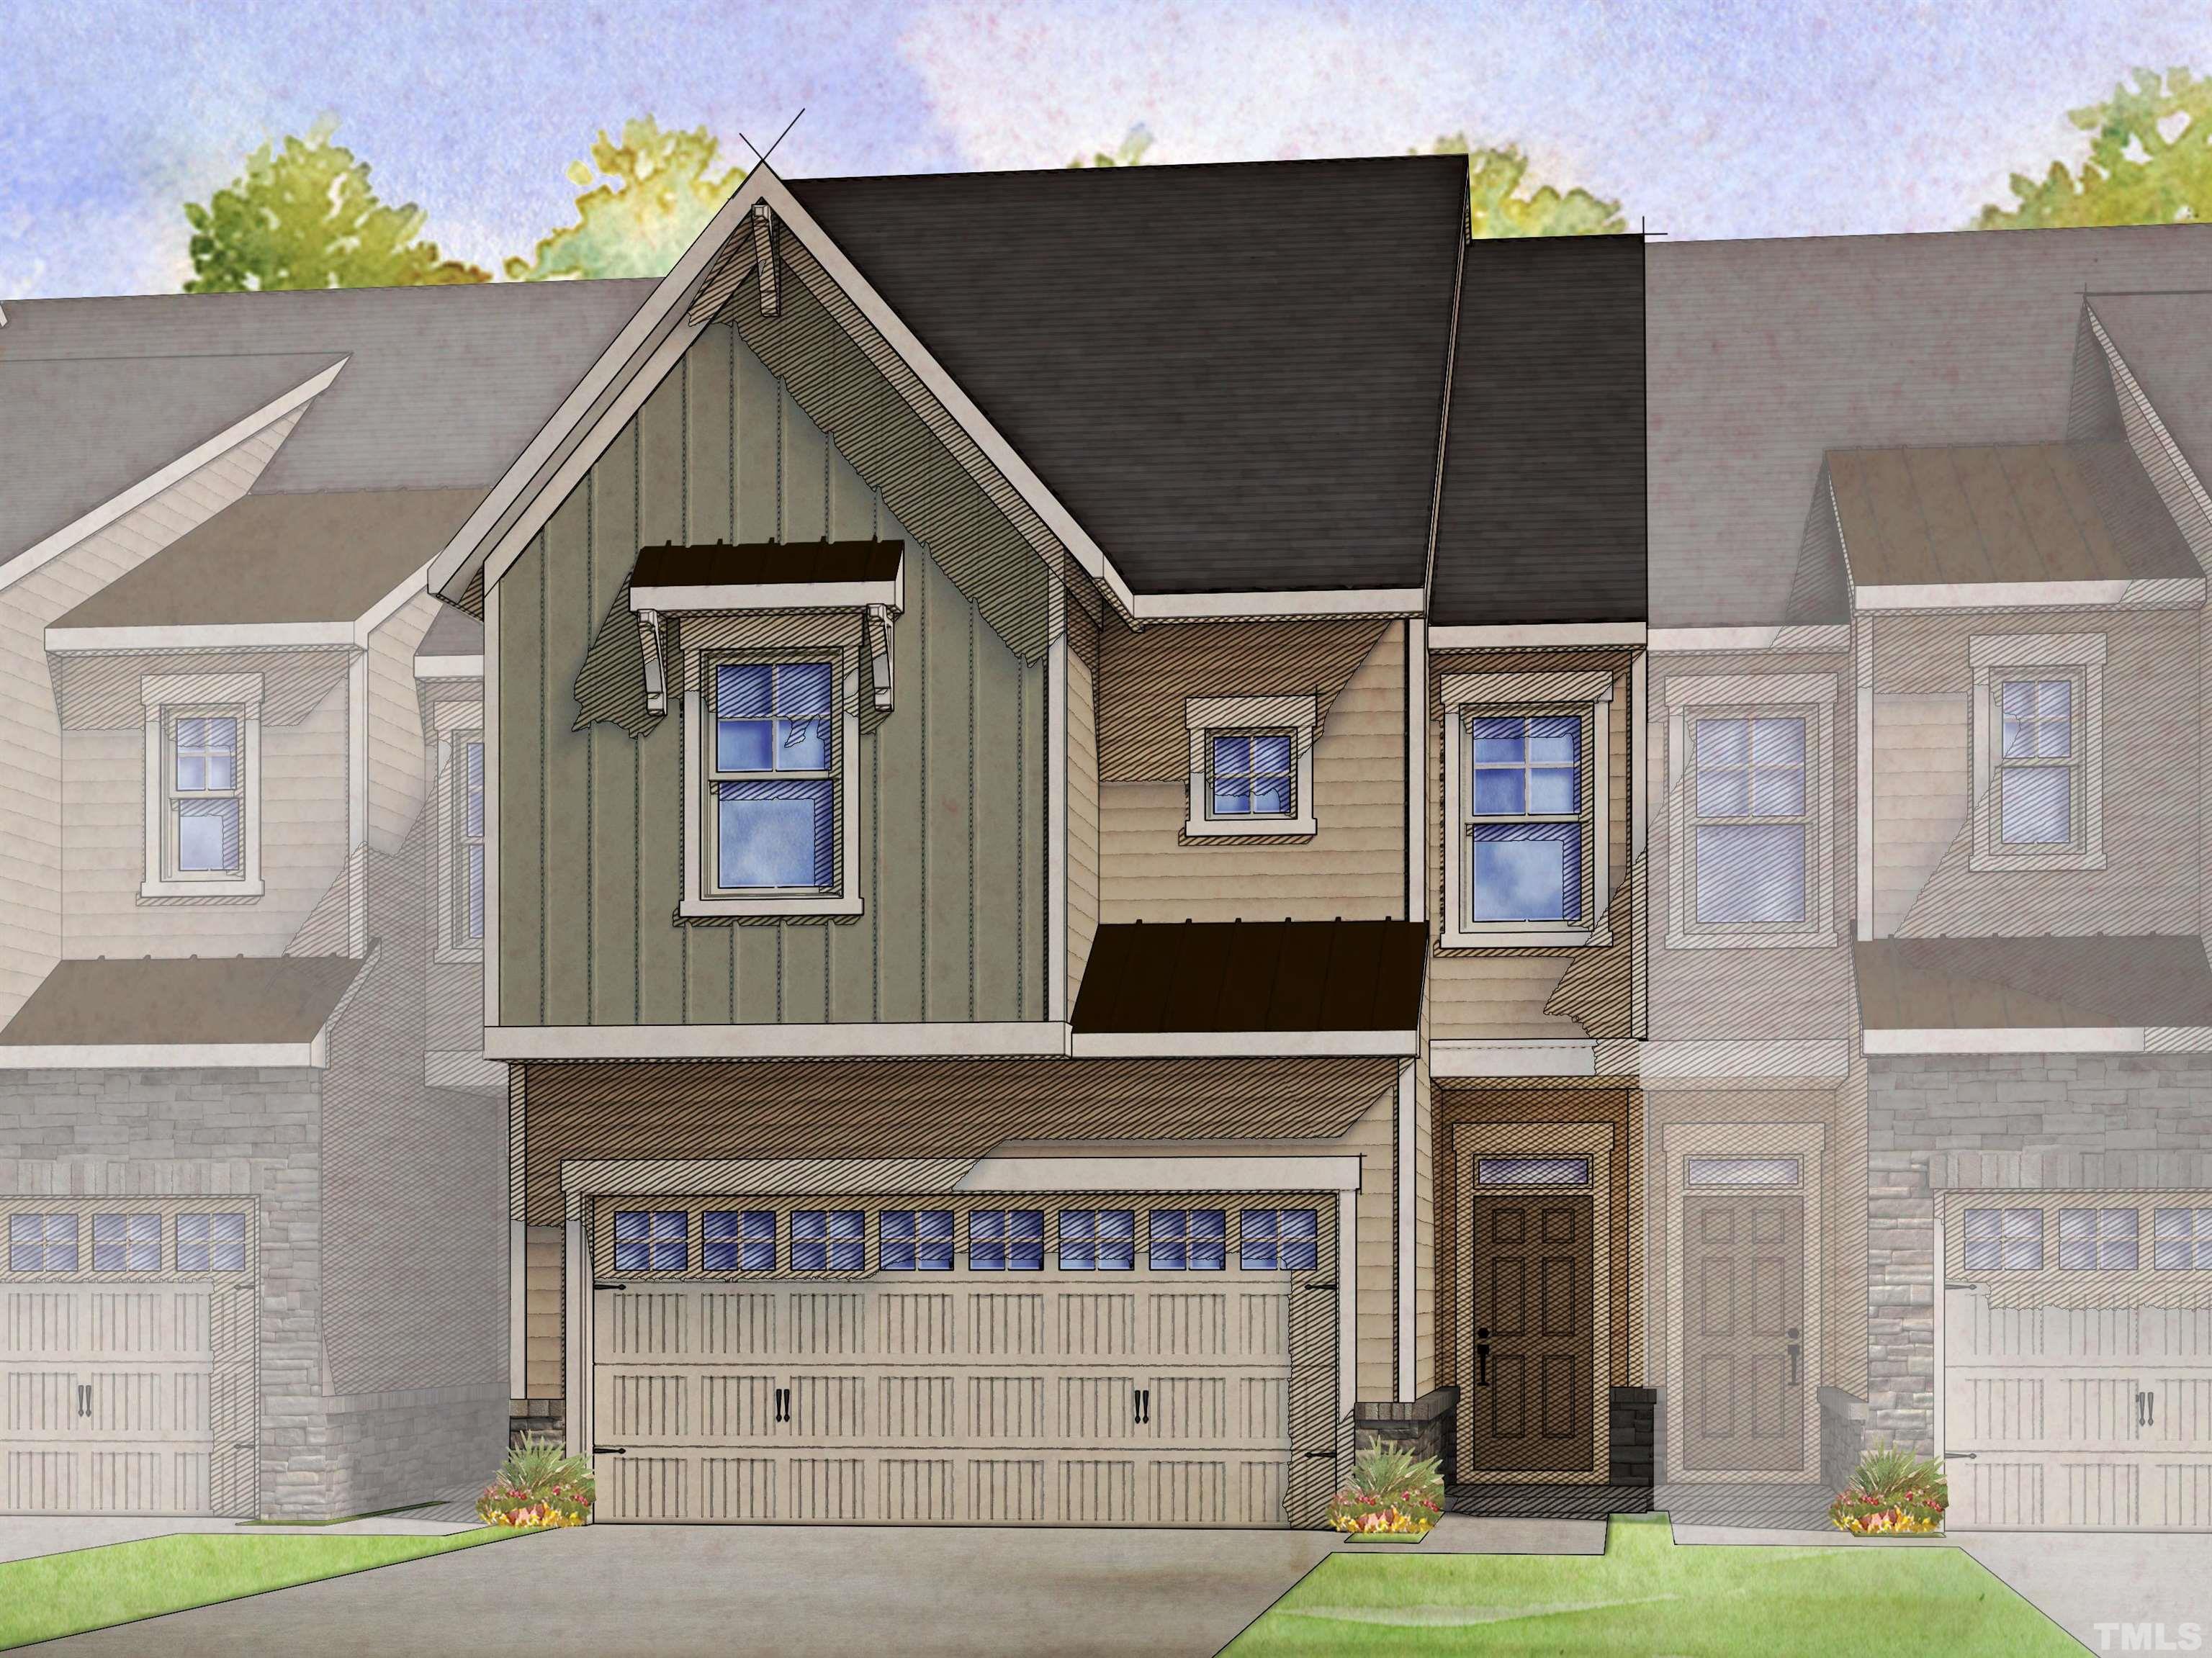 TOWNHOME IS UNDER CONSTRUCTION - Rendering is from builder's library and shown as an example only (colors, features and options will vary).